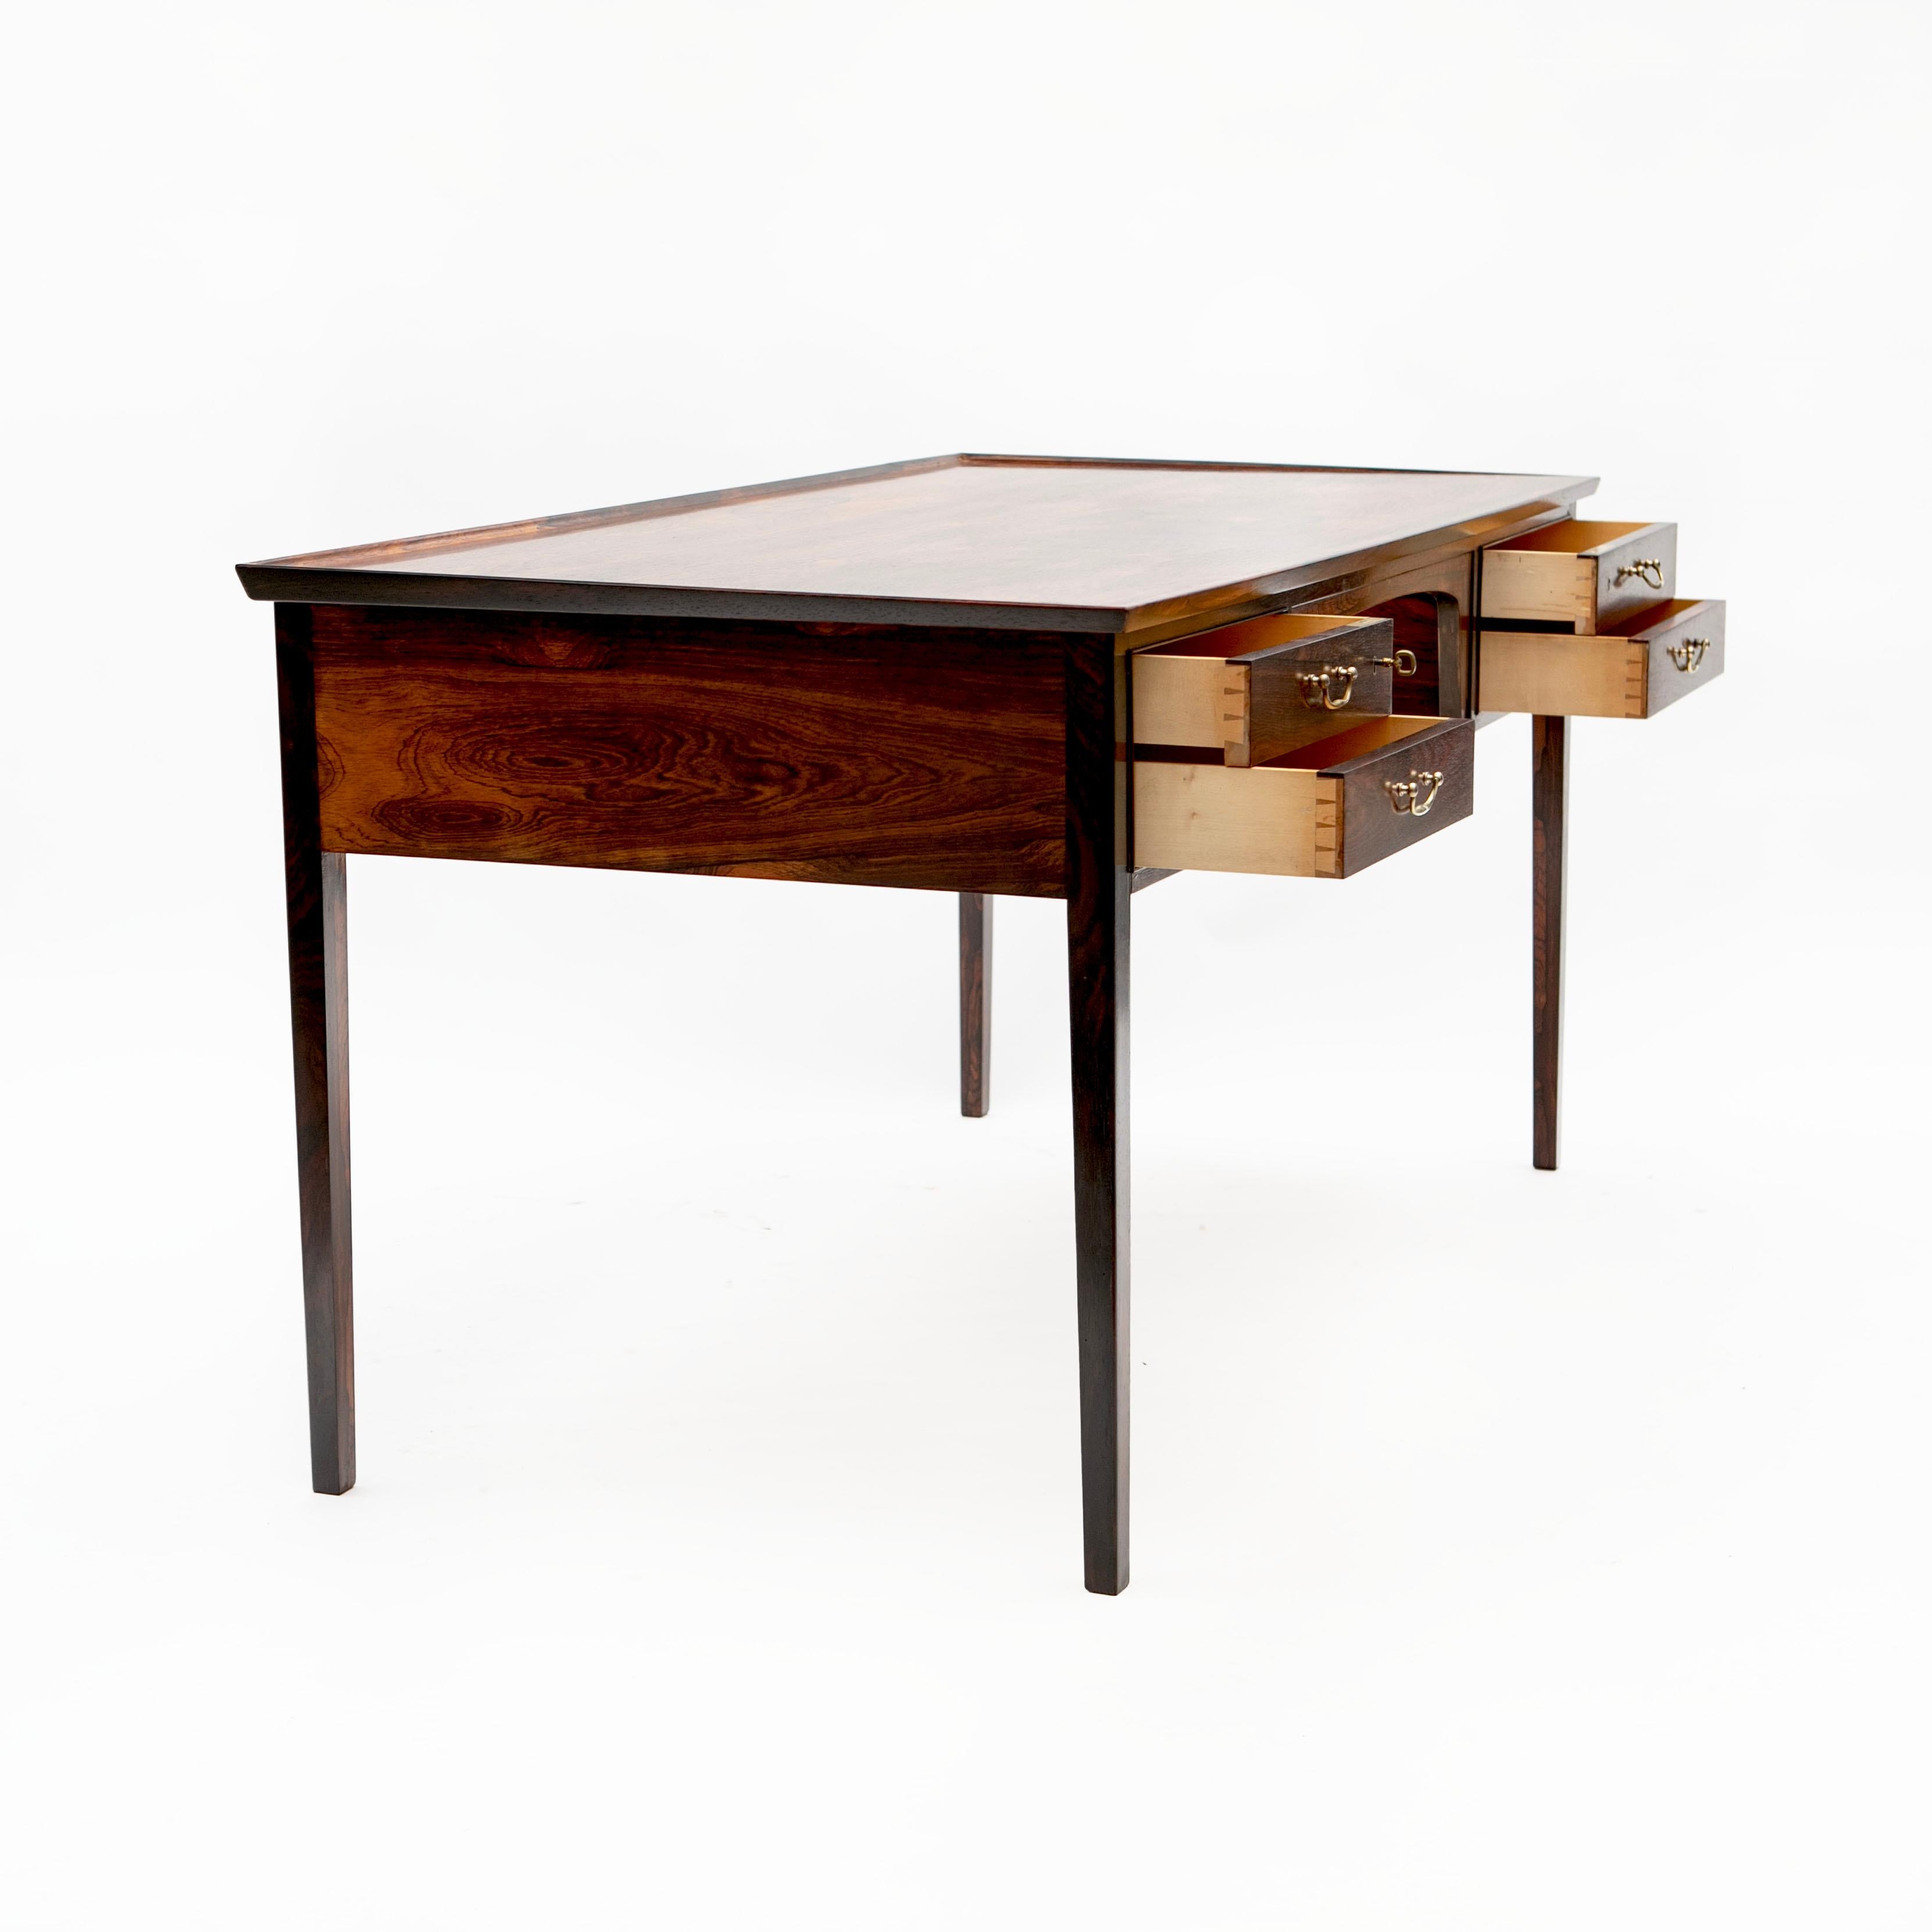 Freestanding Rio rosewood writing desk with beautiful grain designed by Jacob Kjær, Denmark 1950-1960.
Front with 2x2 drawers with brass pulls. Top with raised edge.
The desk shows remarkable high-quality craftsmanship and is equipped with many